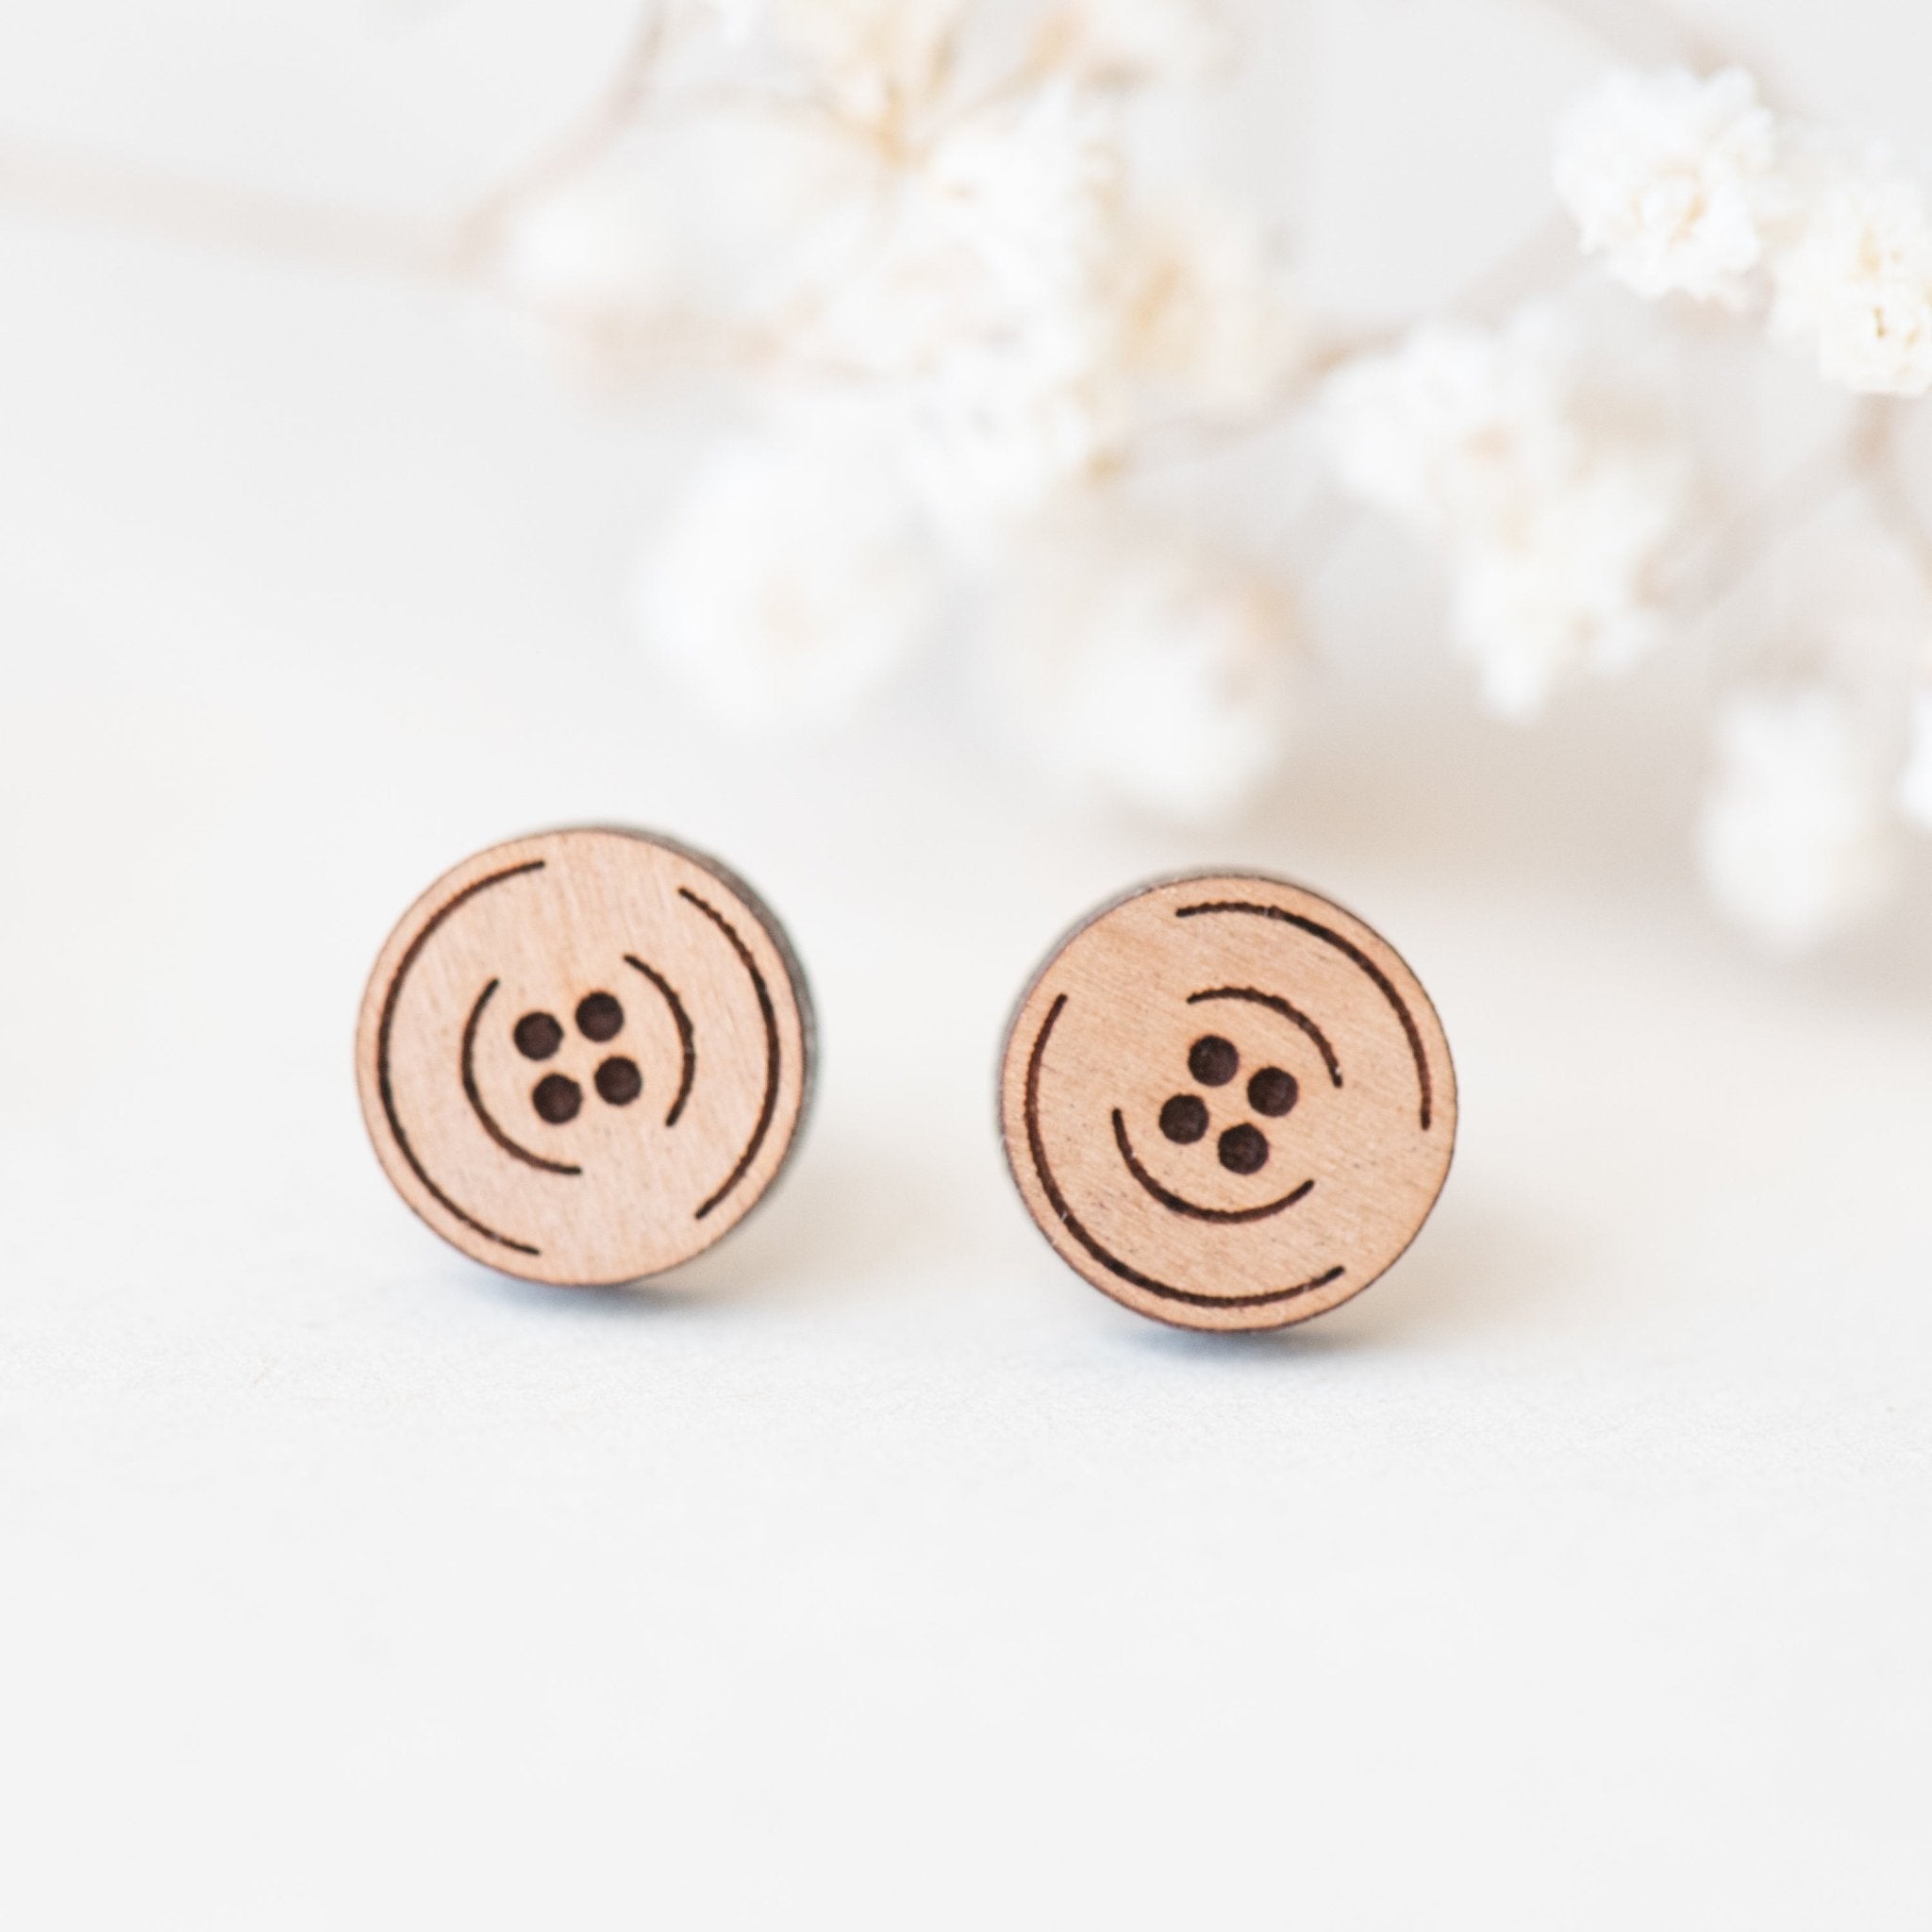 Button Cherry Wood Stud Earrings - ET15073 - Robin Valley Official Store